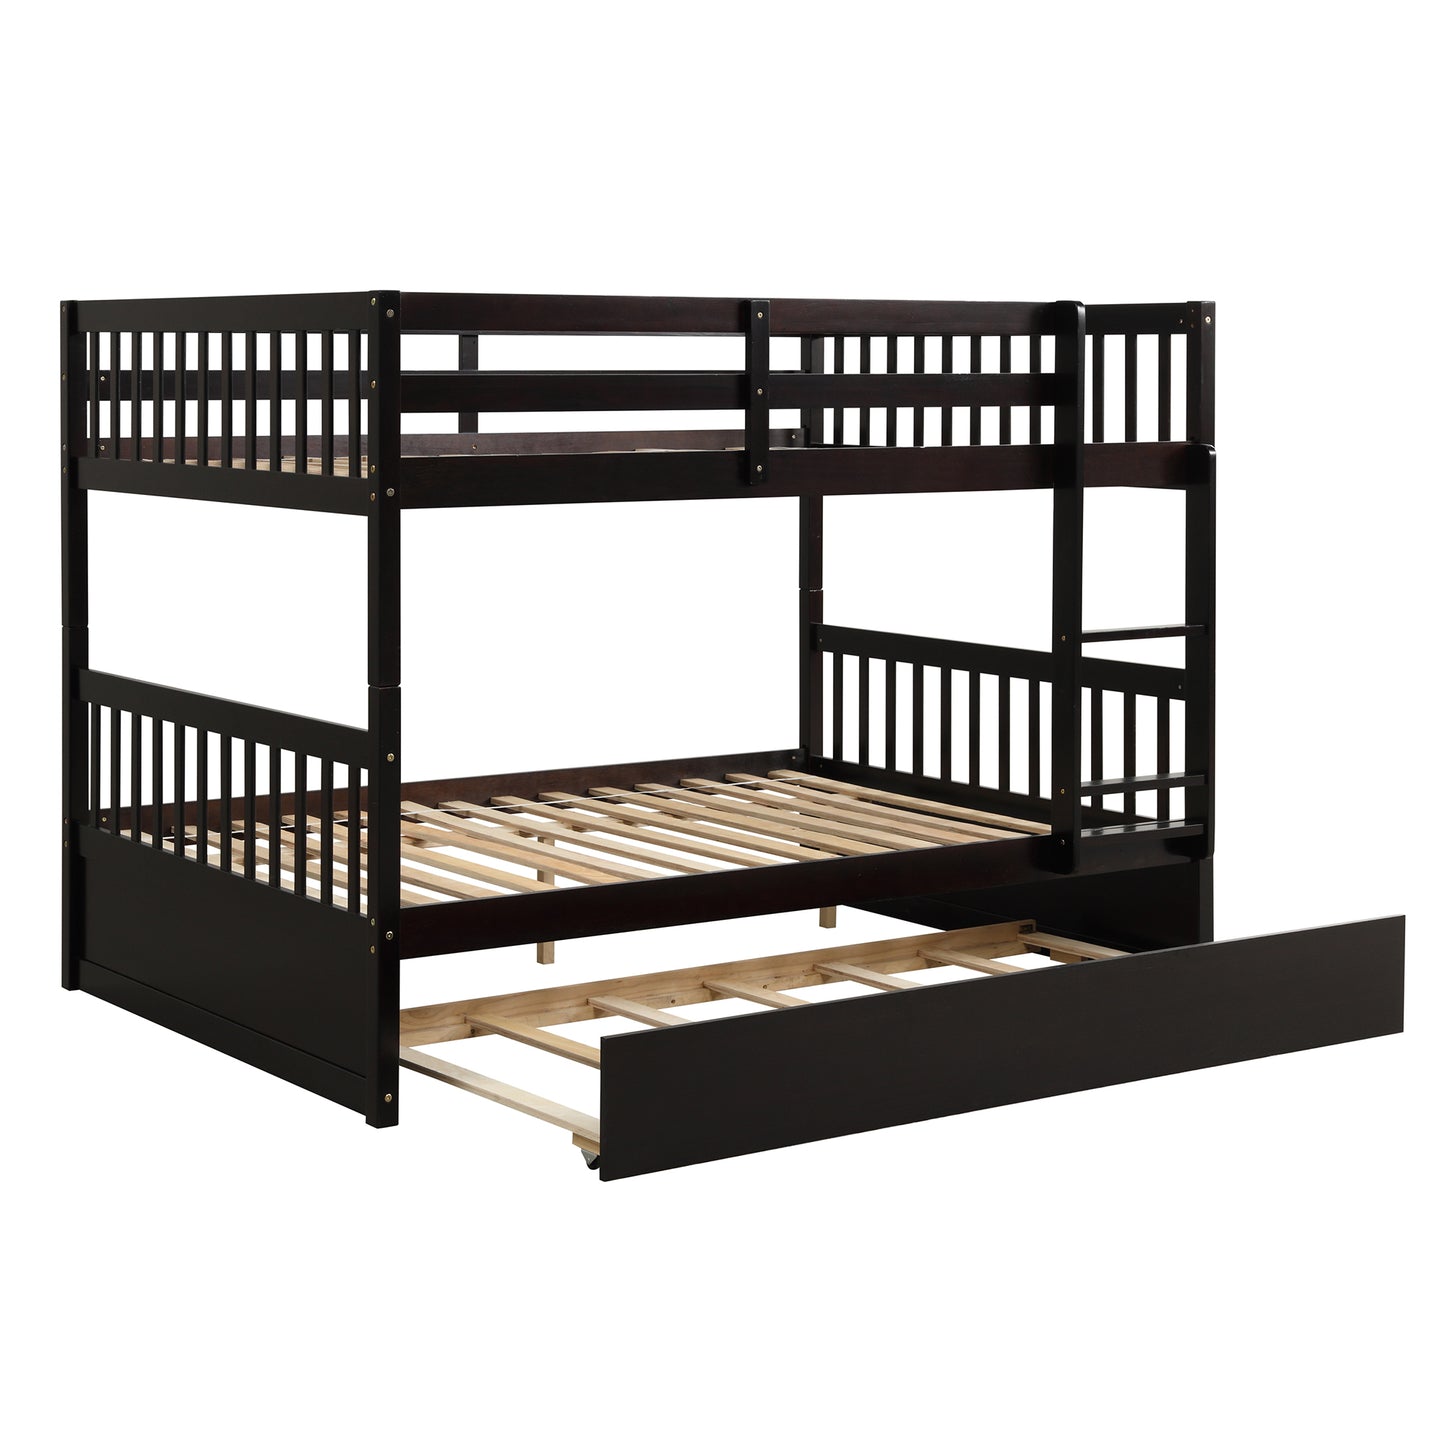 SYNGAR Espresso Bunk Bed with Trundle, Full Over Full Bunk Beds with Ladder, Solid Wood Trundle Bed with Safety High Guardrails, Convertible Bunk Bed for Kids, Boys, Girls, Teens, Adults